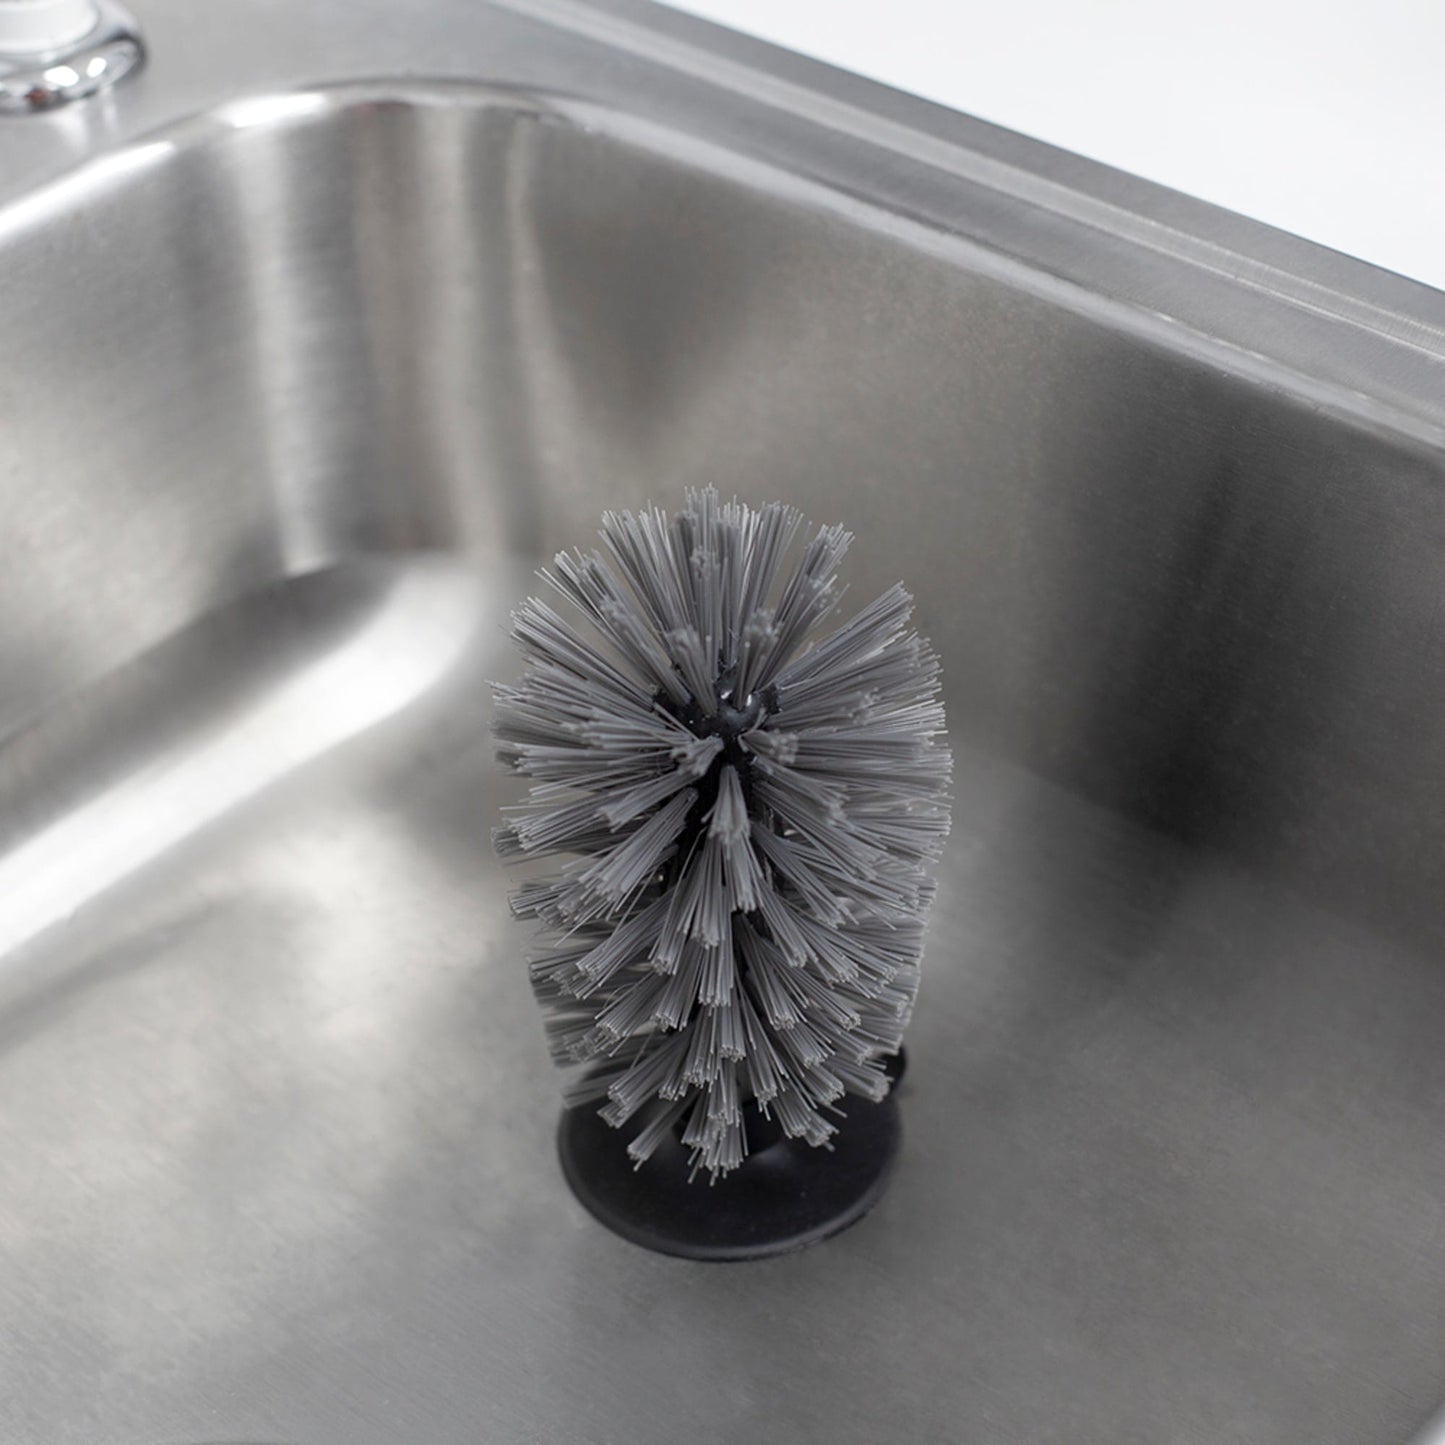 Standing Suction Cup Plastic Sink Brush, Black